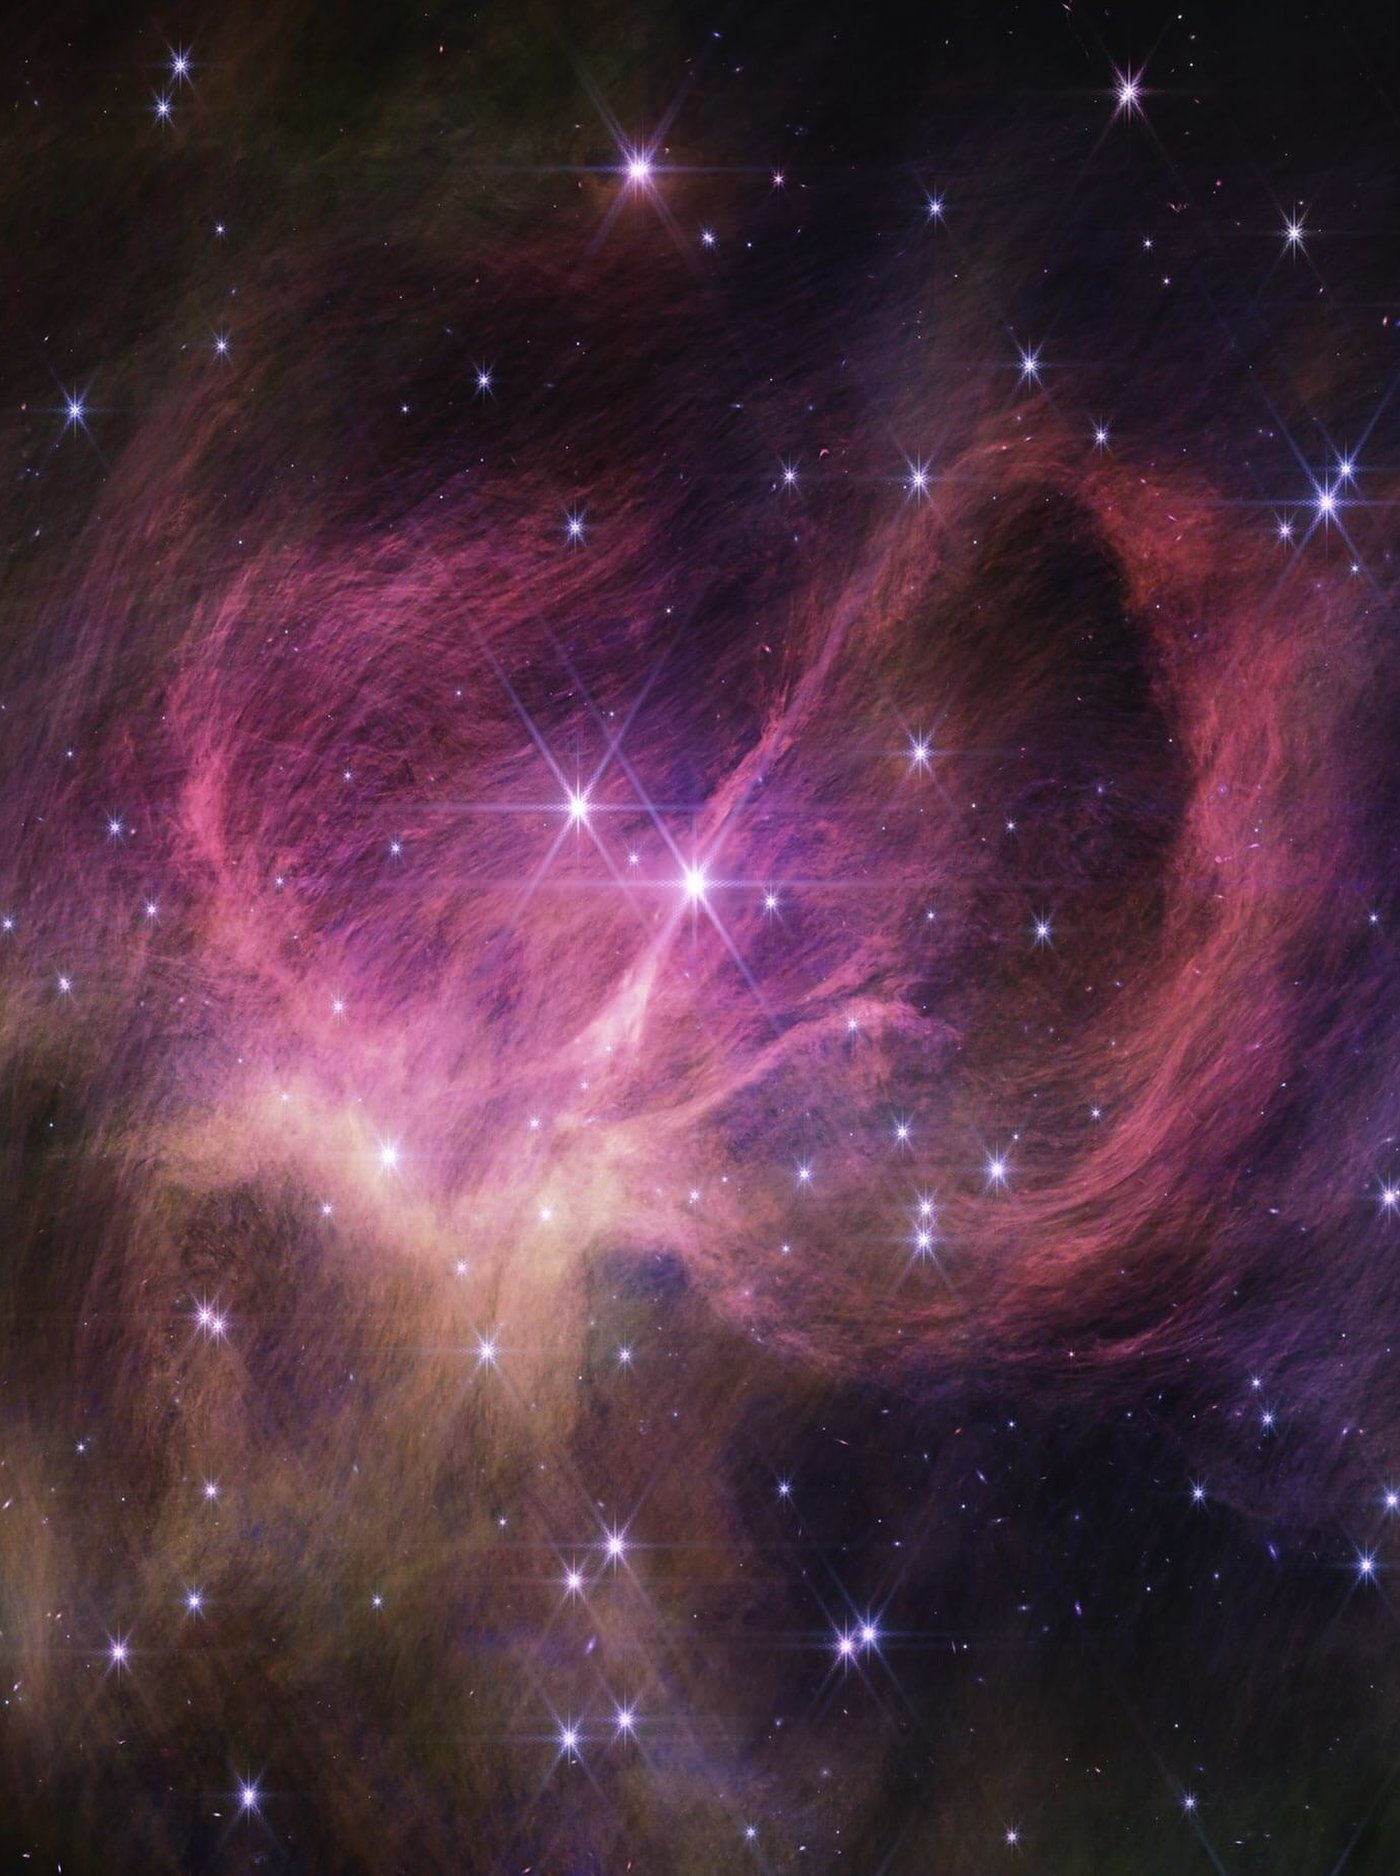 Orange and pink wisps of gas and dust stream between stars